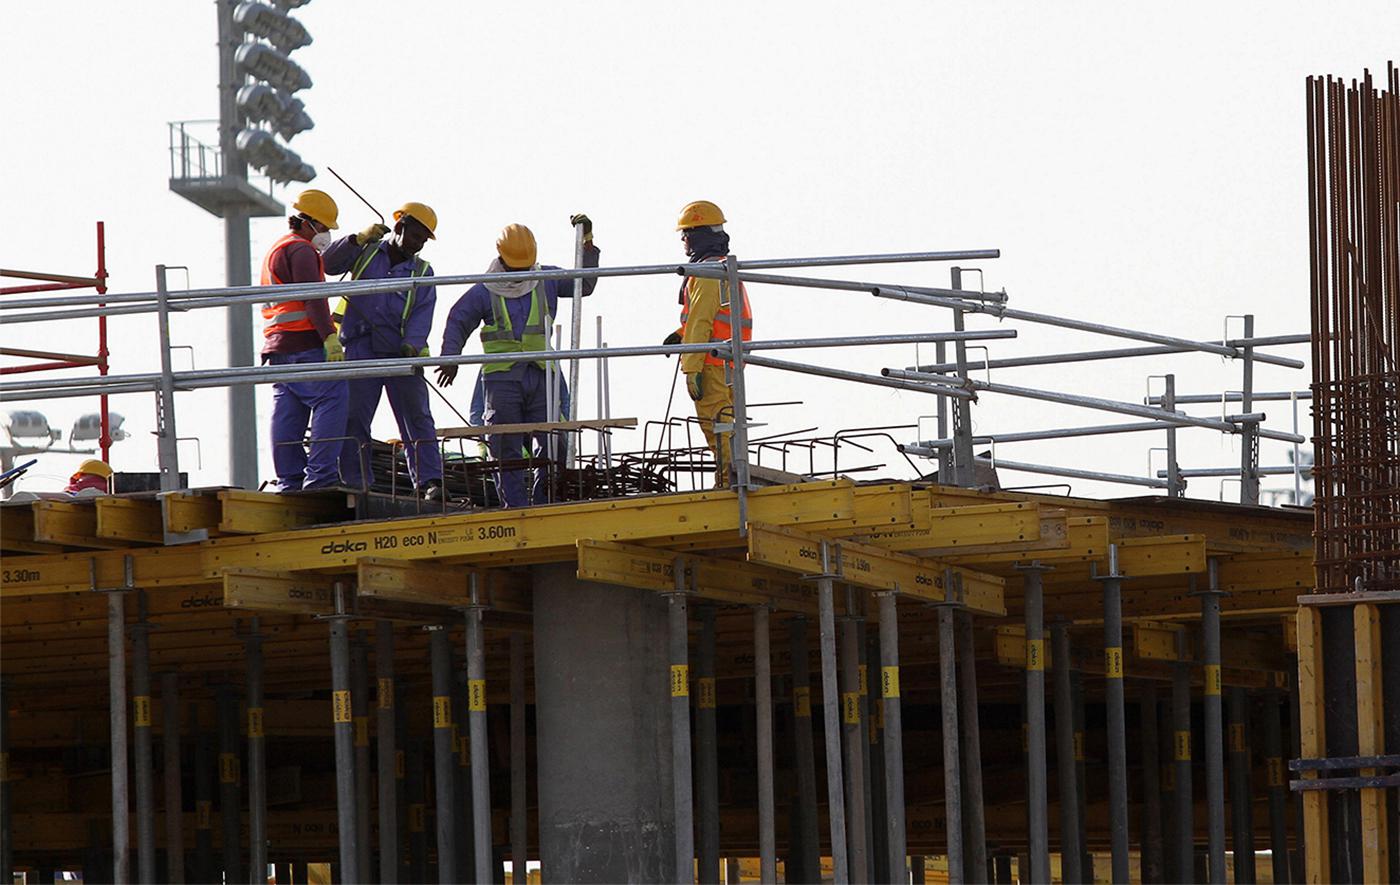 Qatar, Qatar: Take Urgent Action to Protect Construction Workers